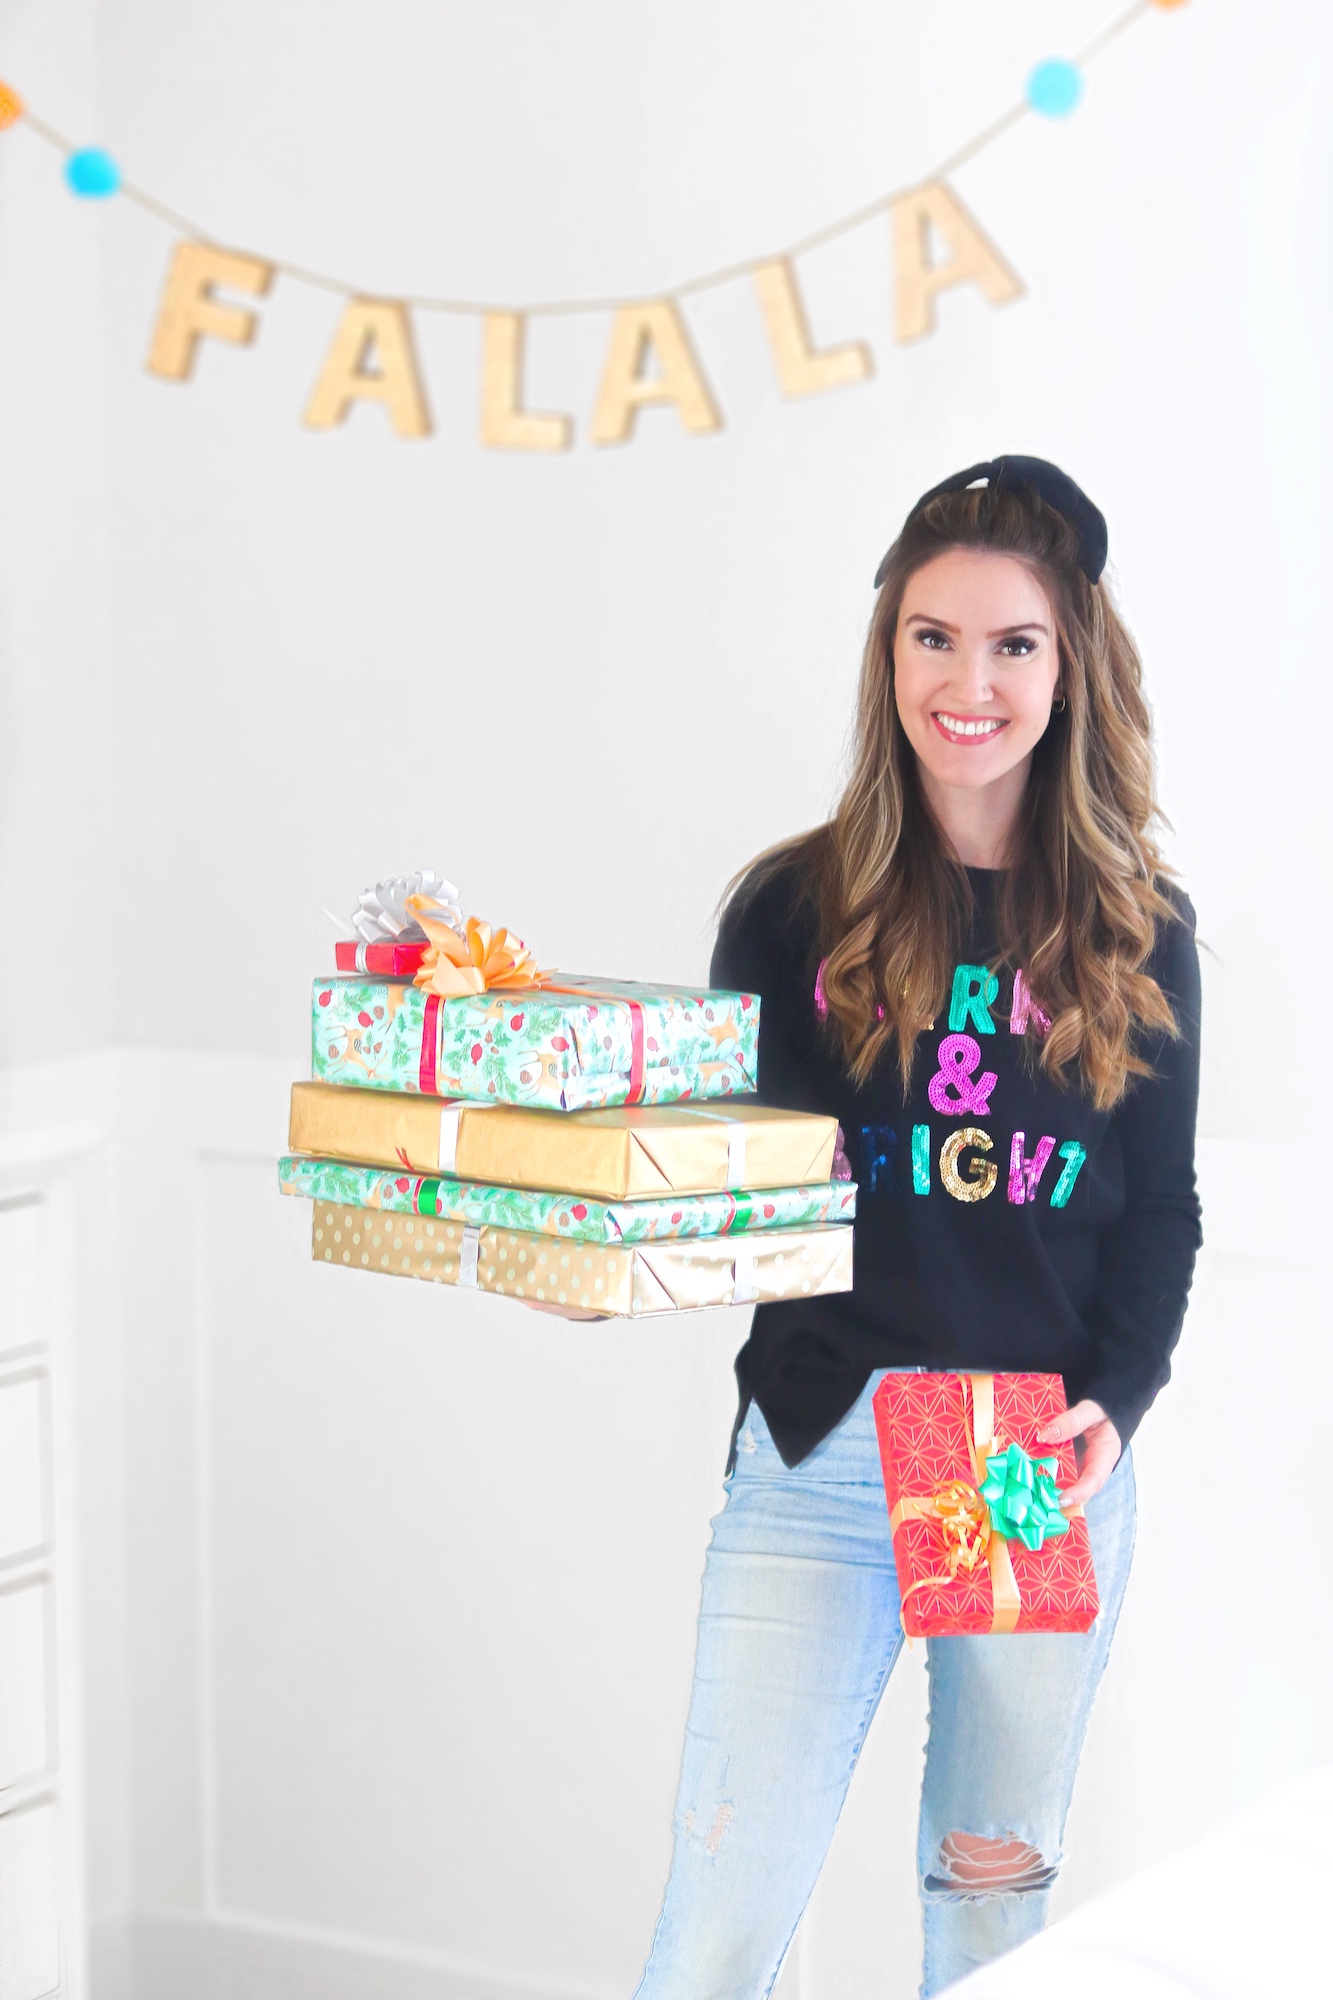 Local Christmas gift guide at Kingsway Mall with Holly Hunka